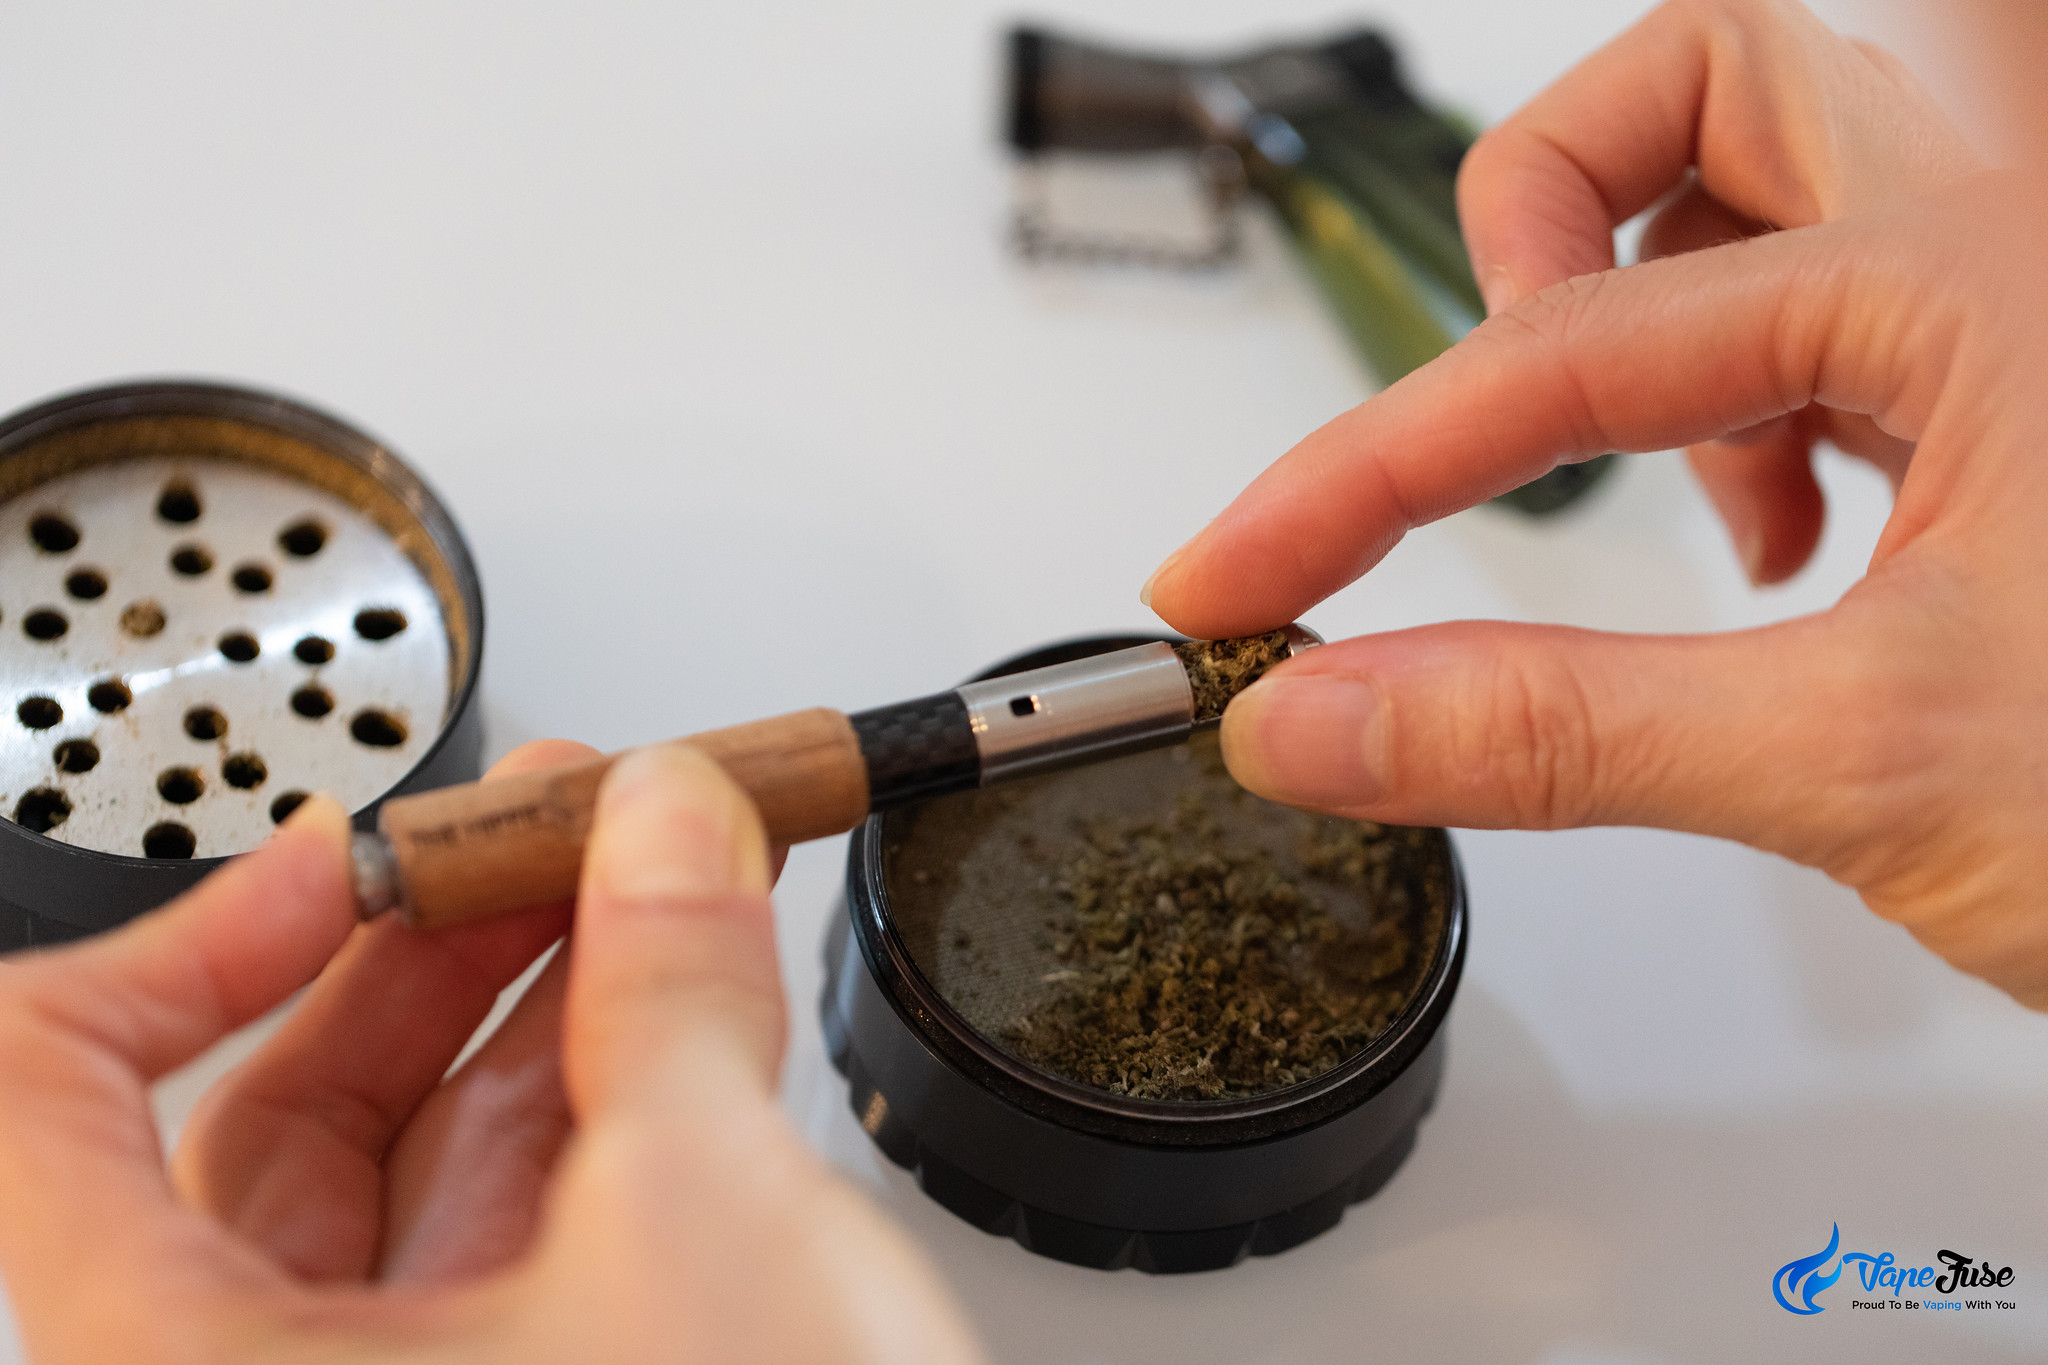 The Hippie Pipe Vaporizer for tiny doses of cannabis